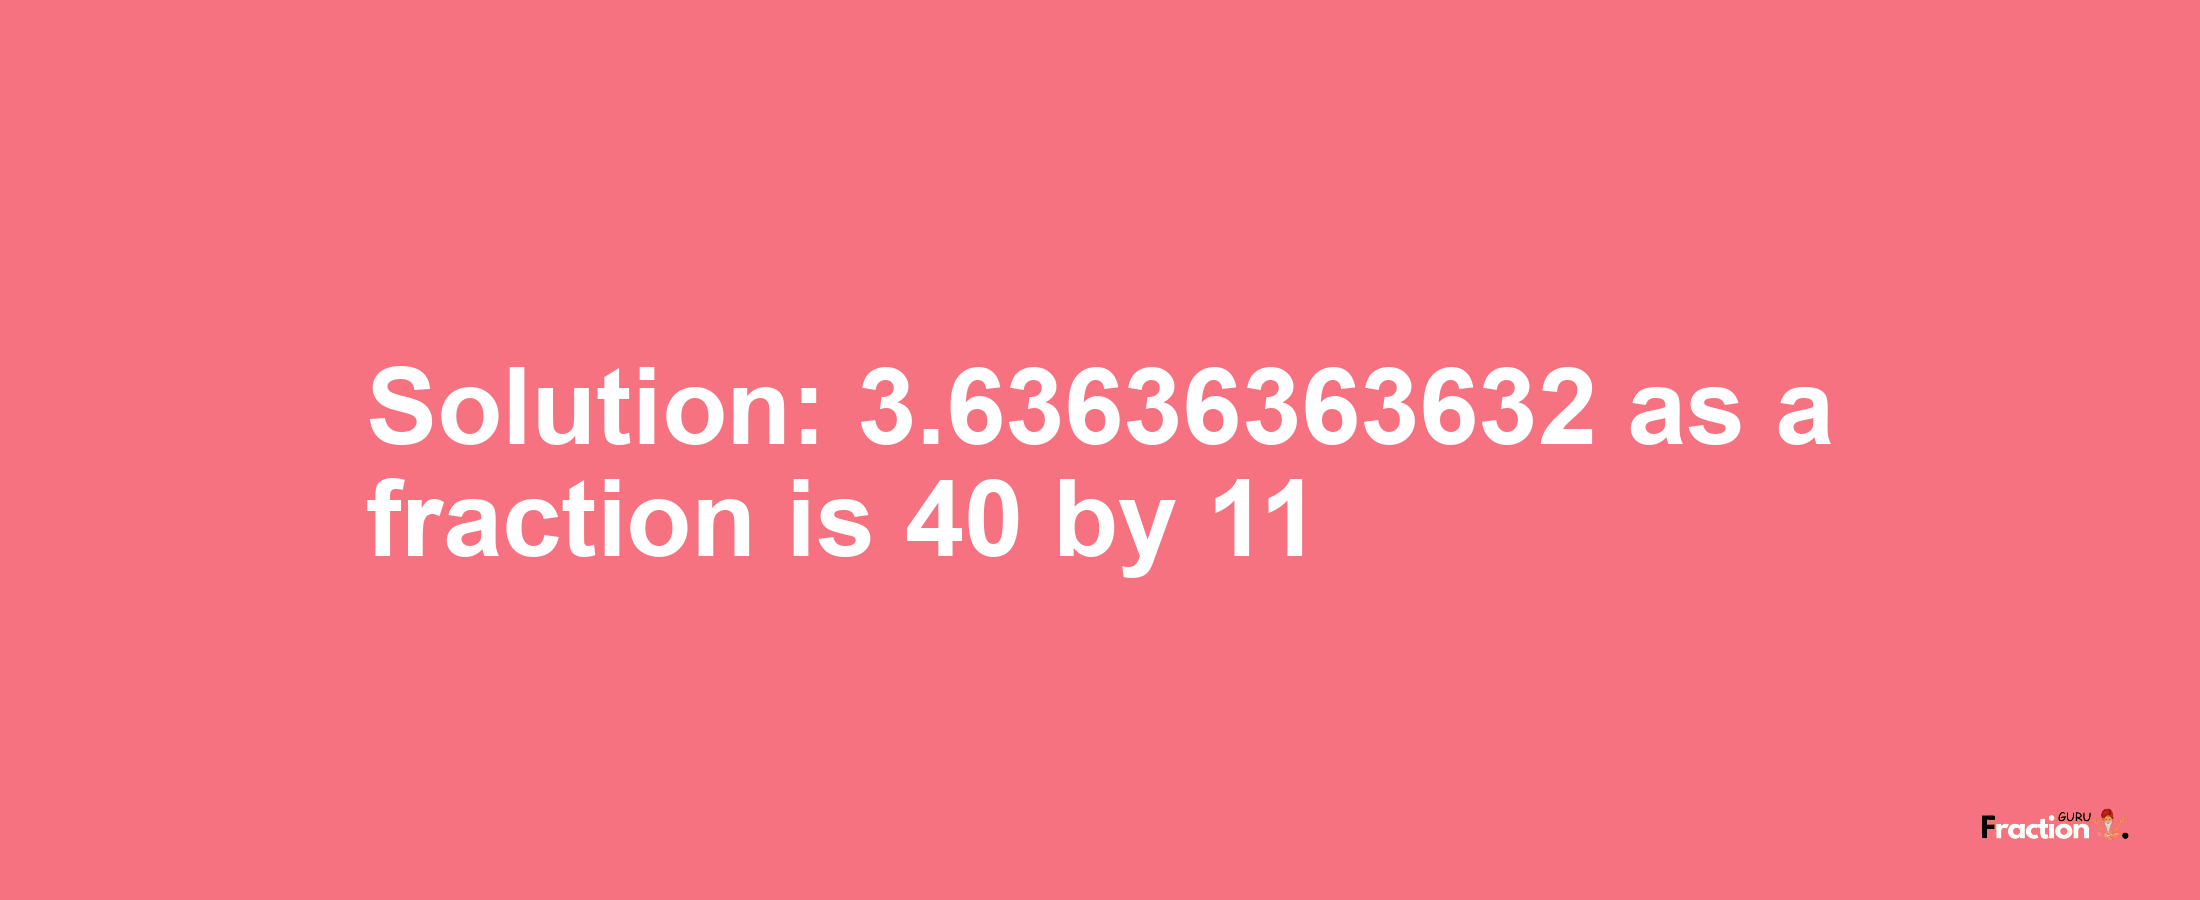 Solution:3.63636363632 as a fraction is 40/11